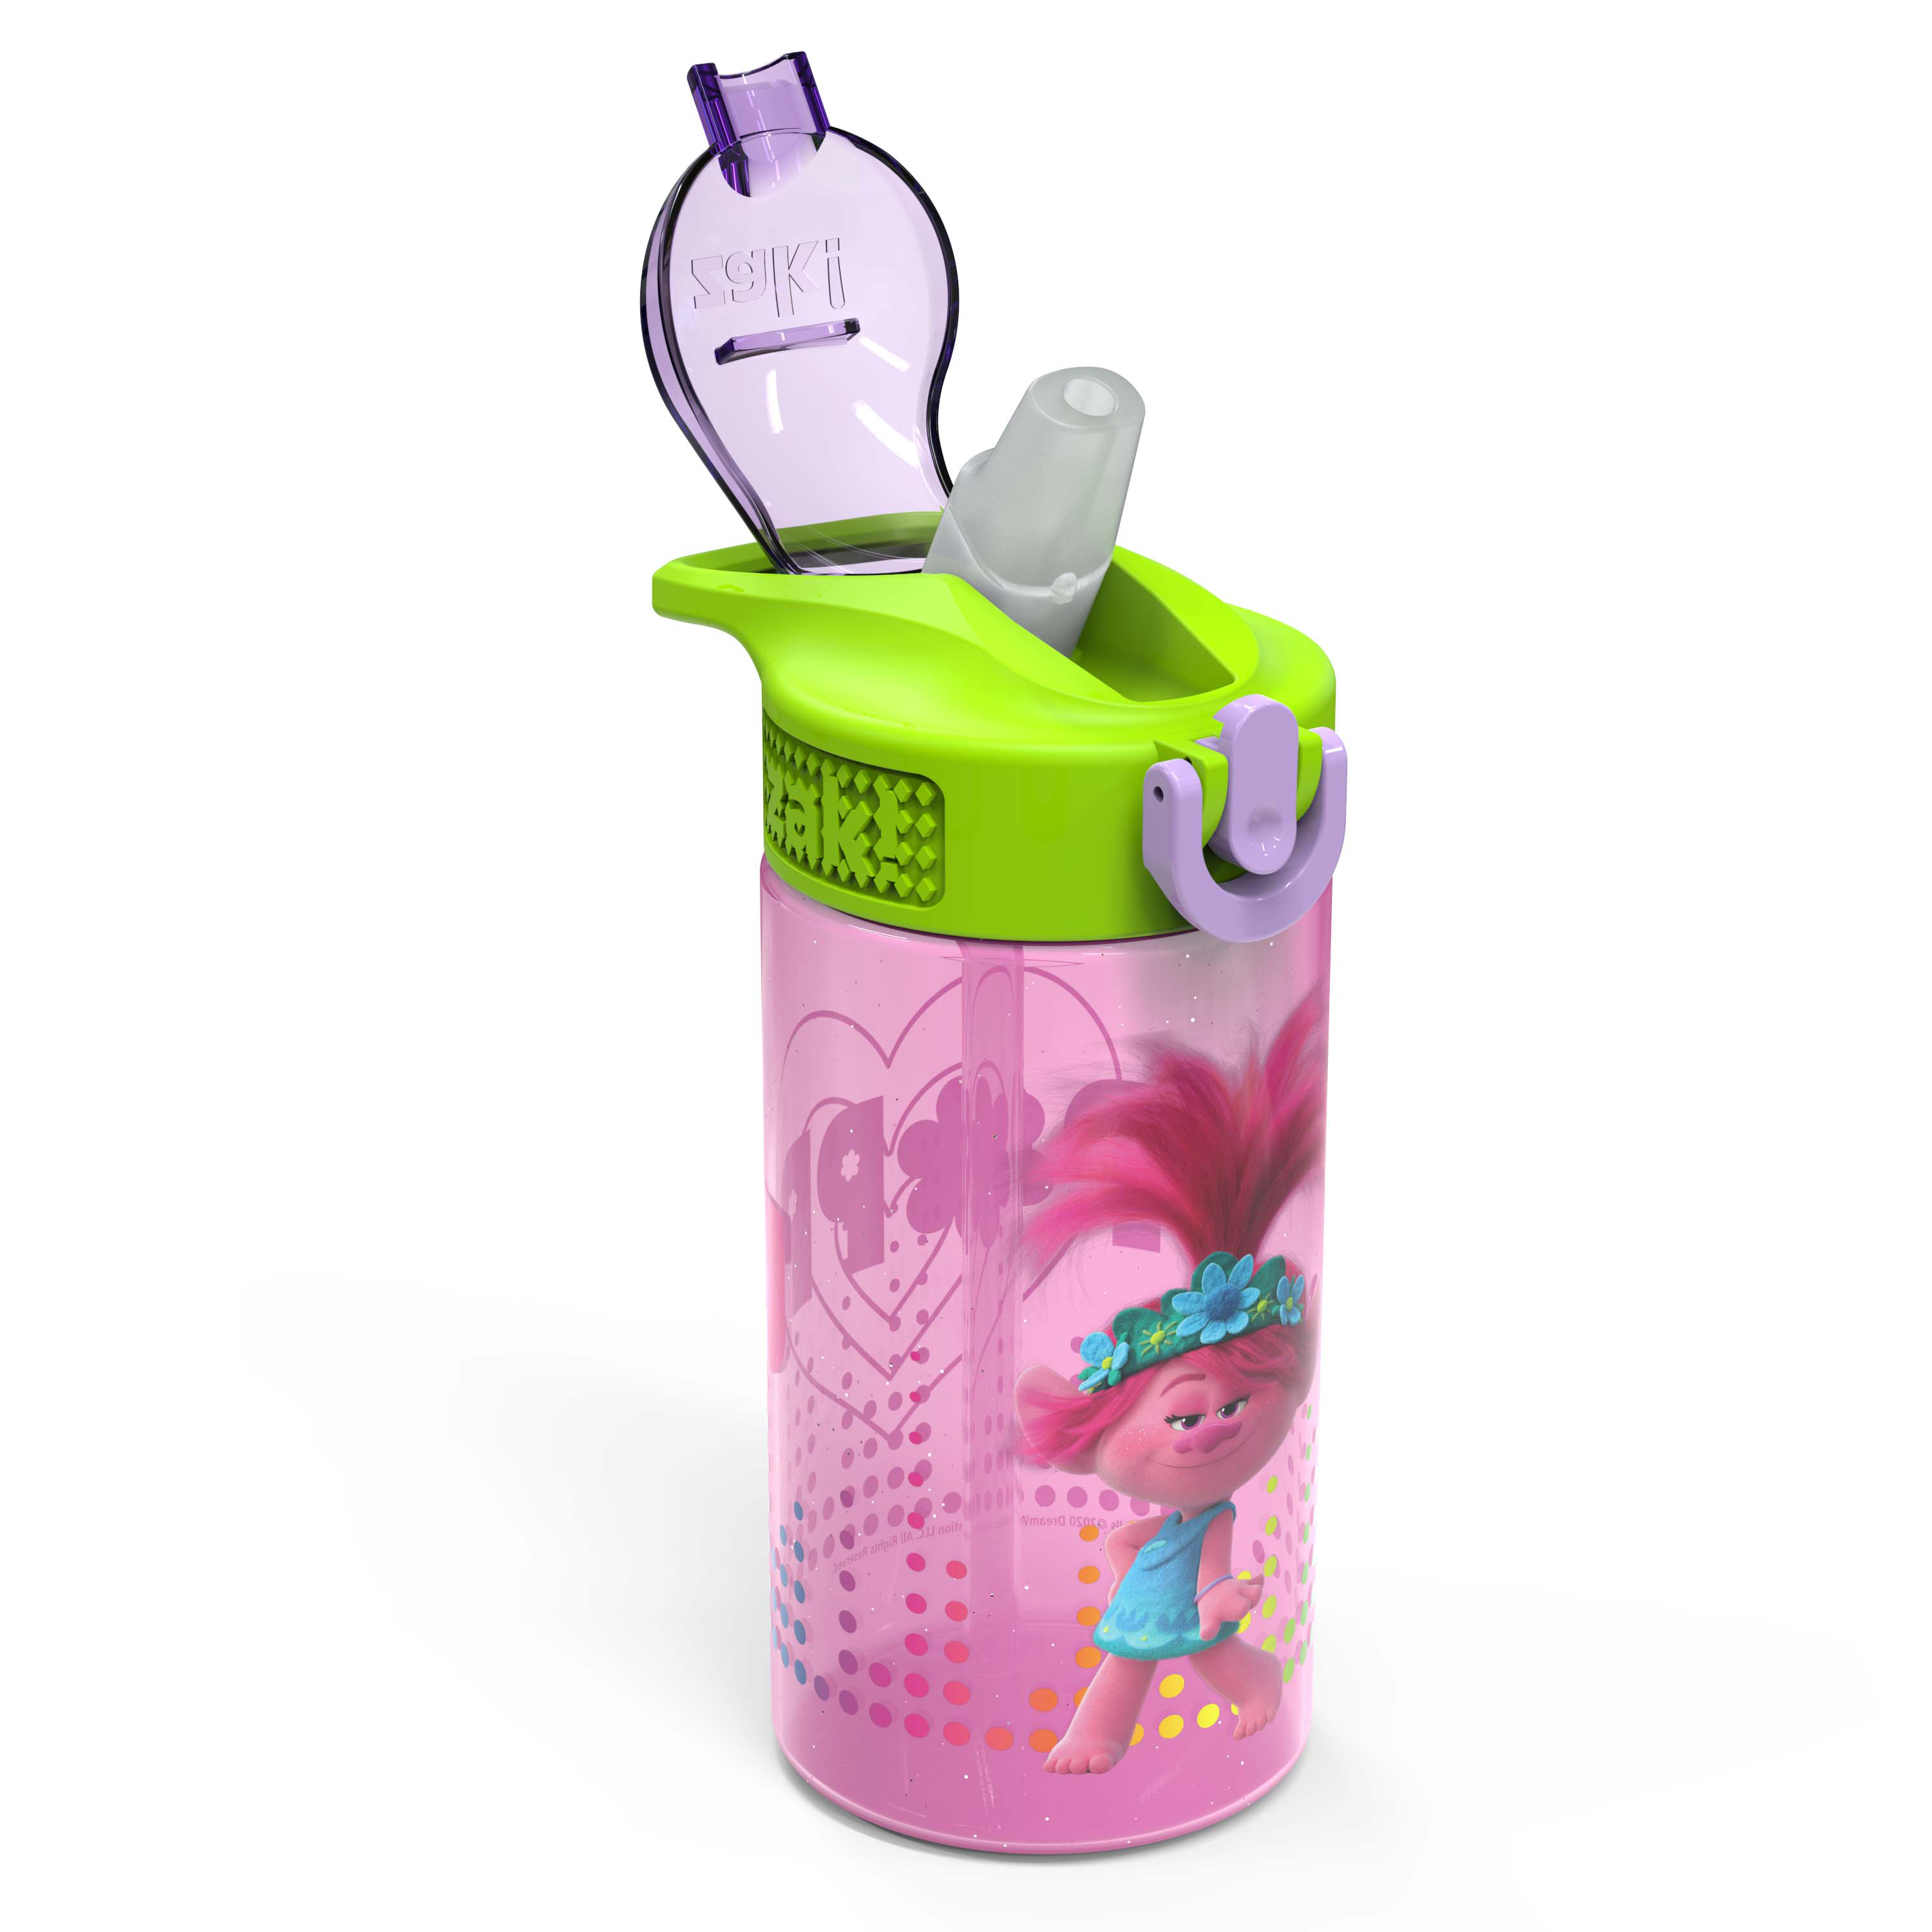 Zak Designs 16 oz Pink, Purple and Green Plastic Water Bottle with Straw and Wide Mouth Lid - image 5 of 8